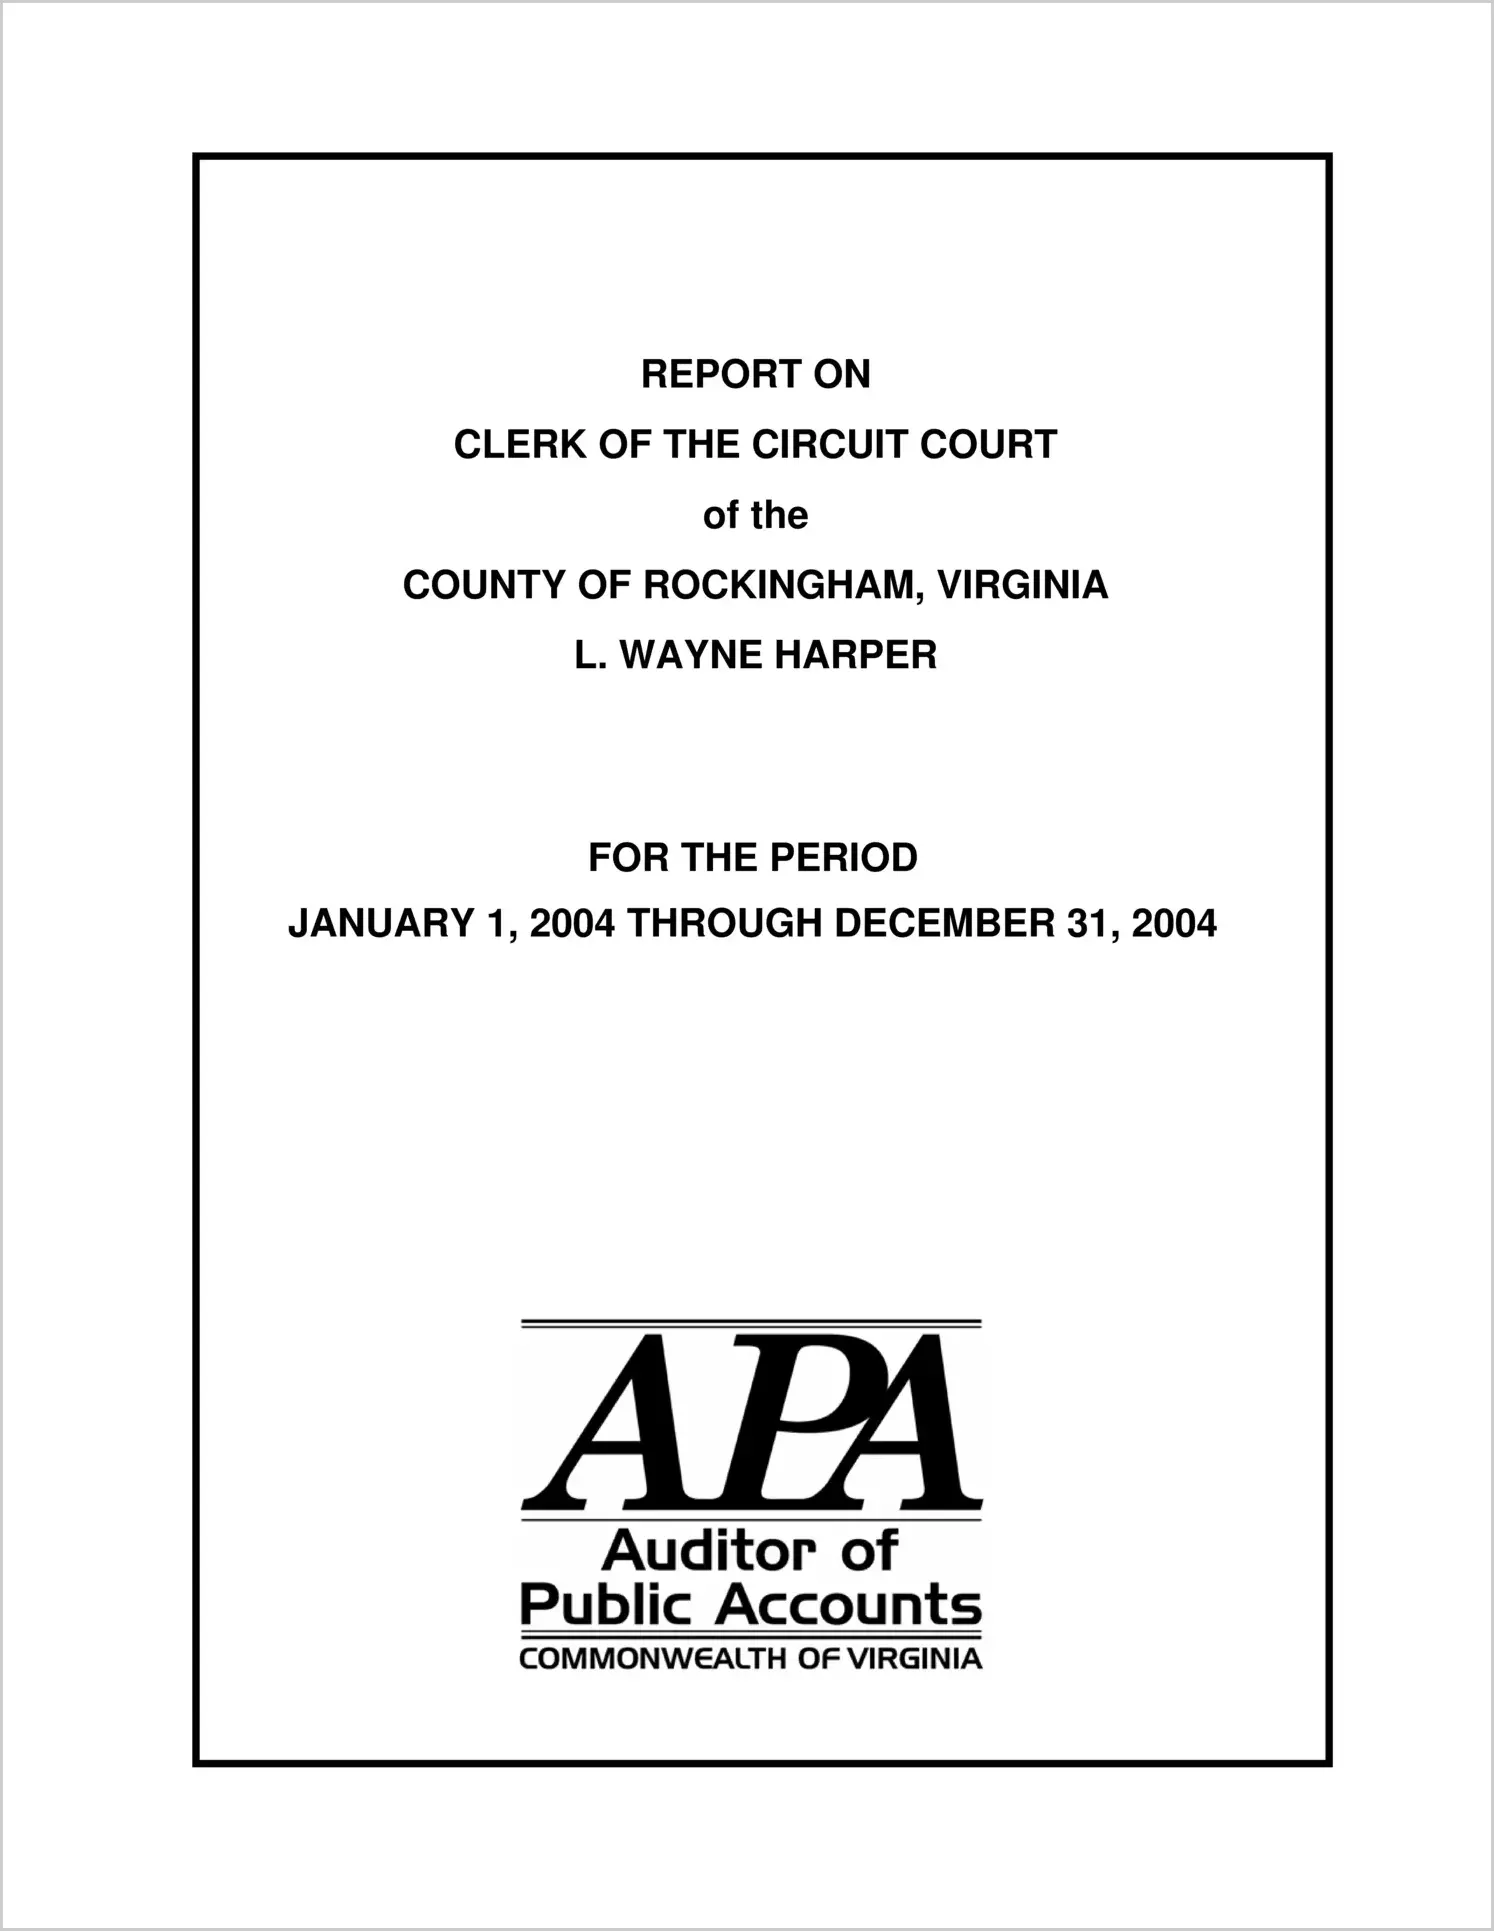 Clerk of the Circuit Court of the County of Rockingham for the period January 1, 2004 through December 31, 2004